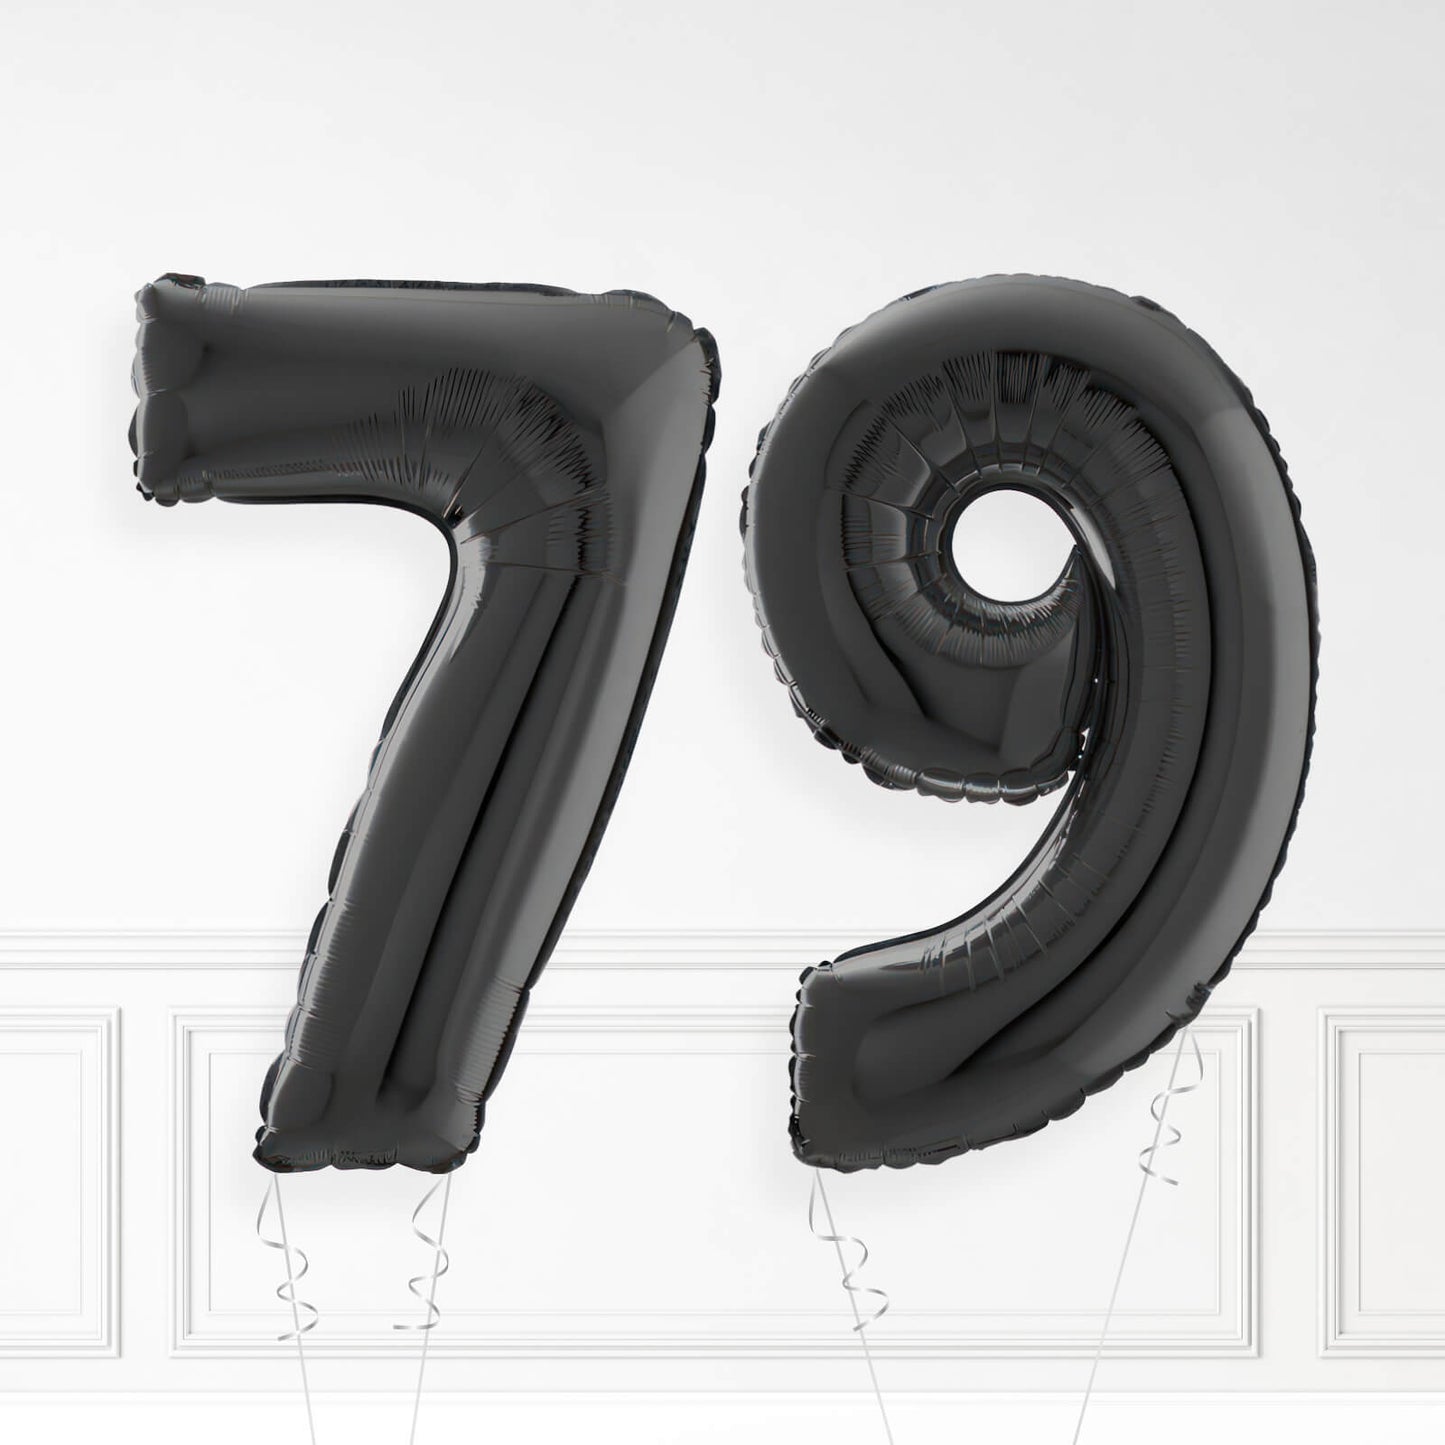 Inflated Black Foil Number Balloon